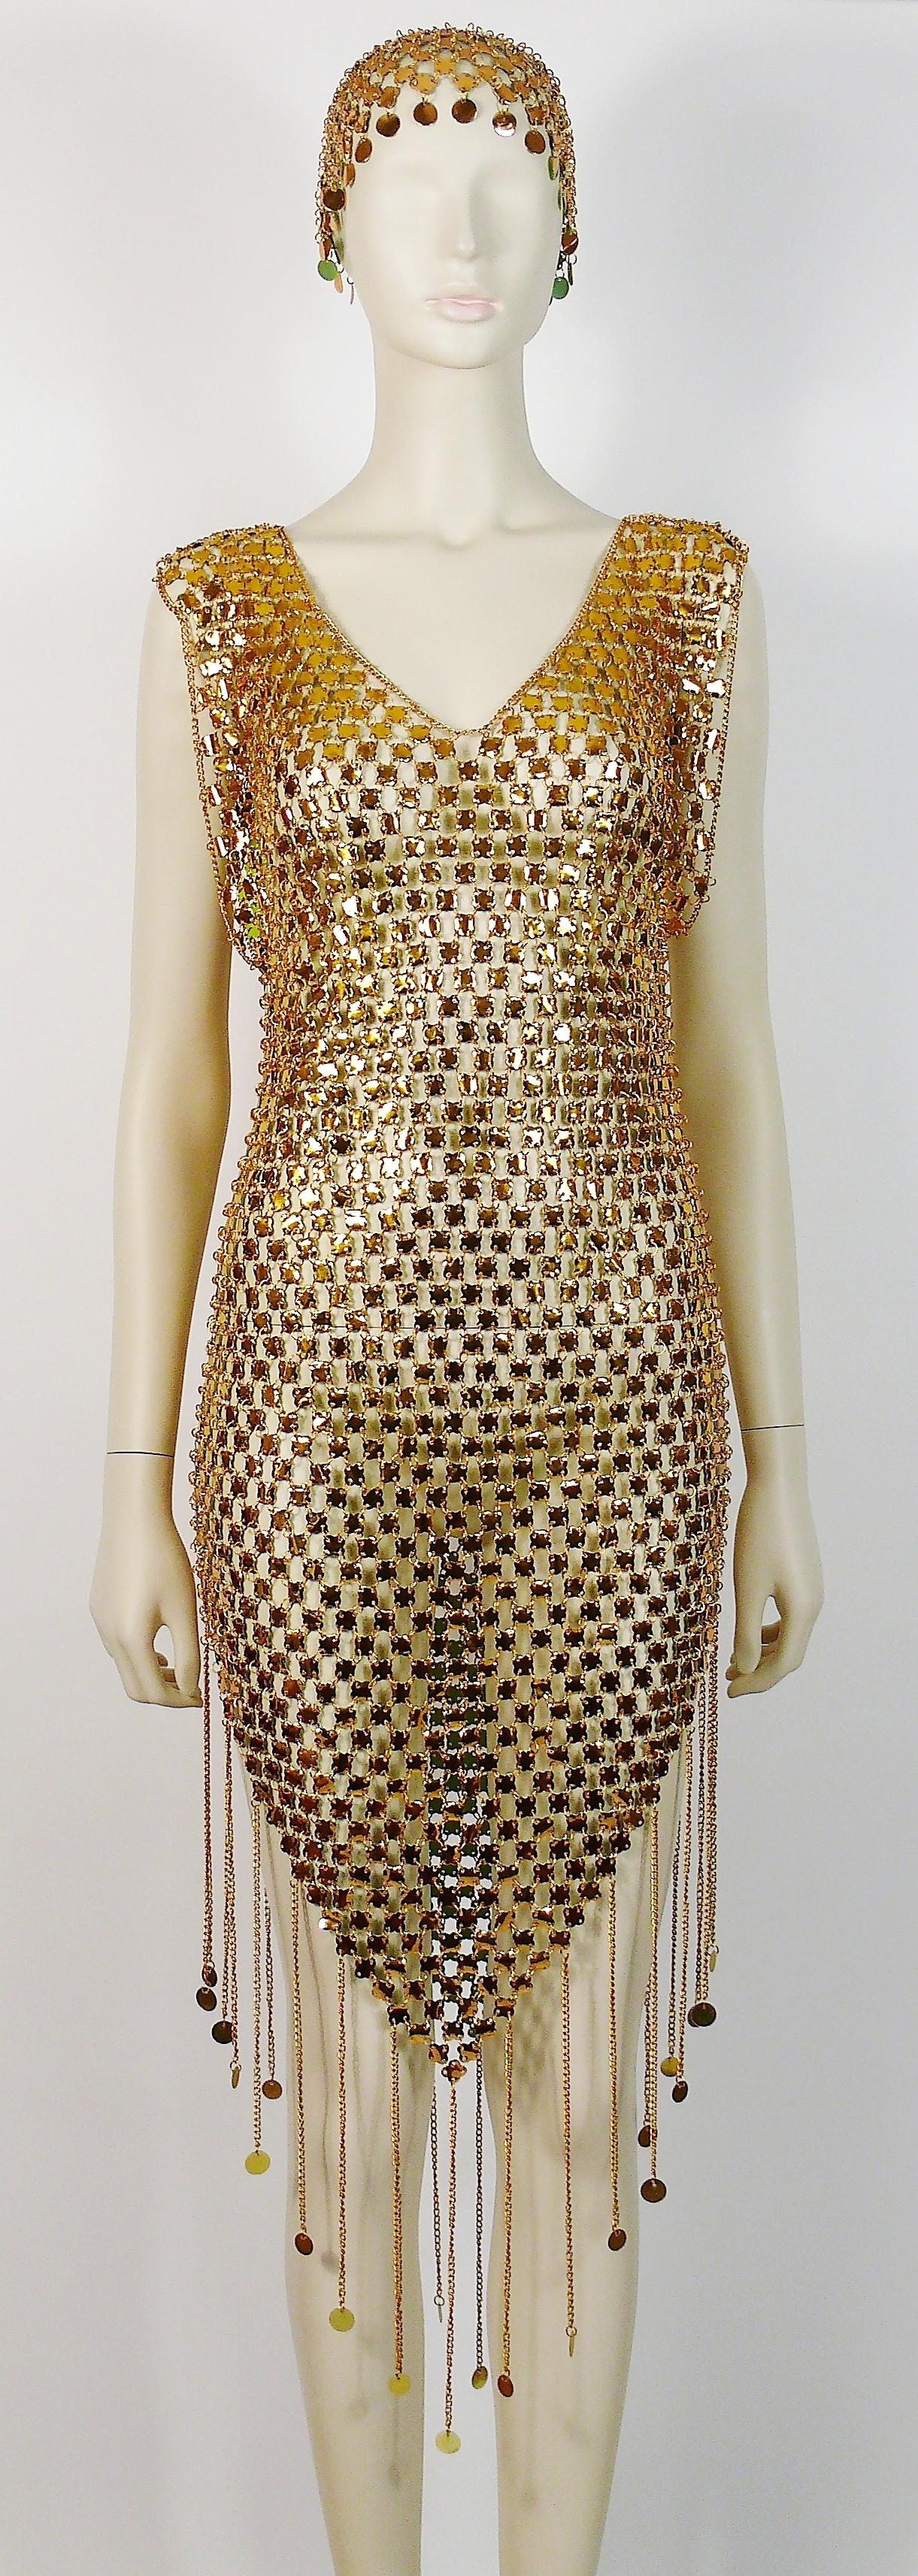 vintage chainmail dress